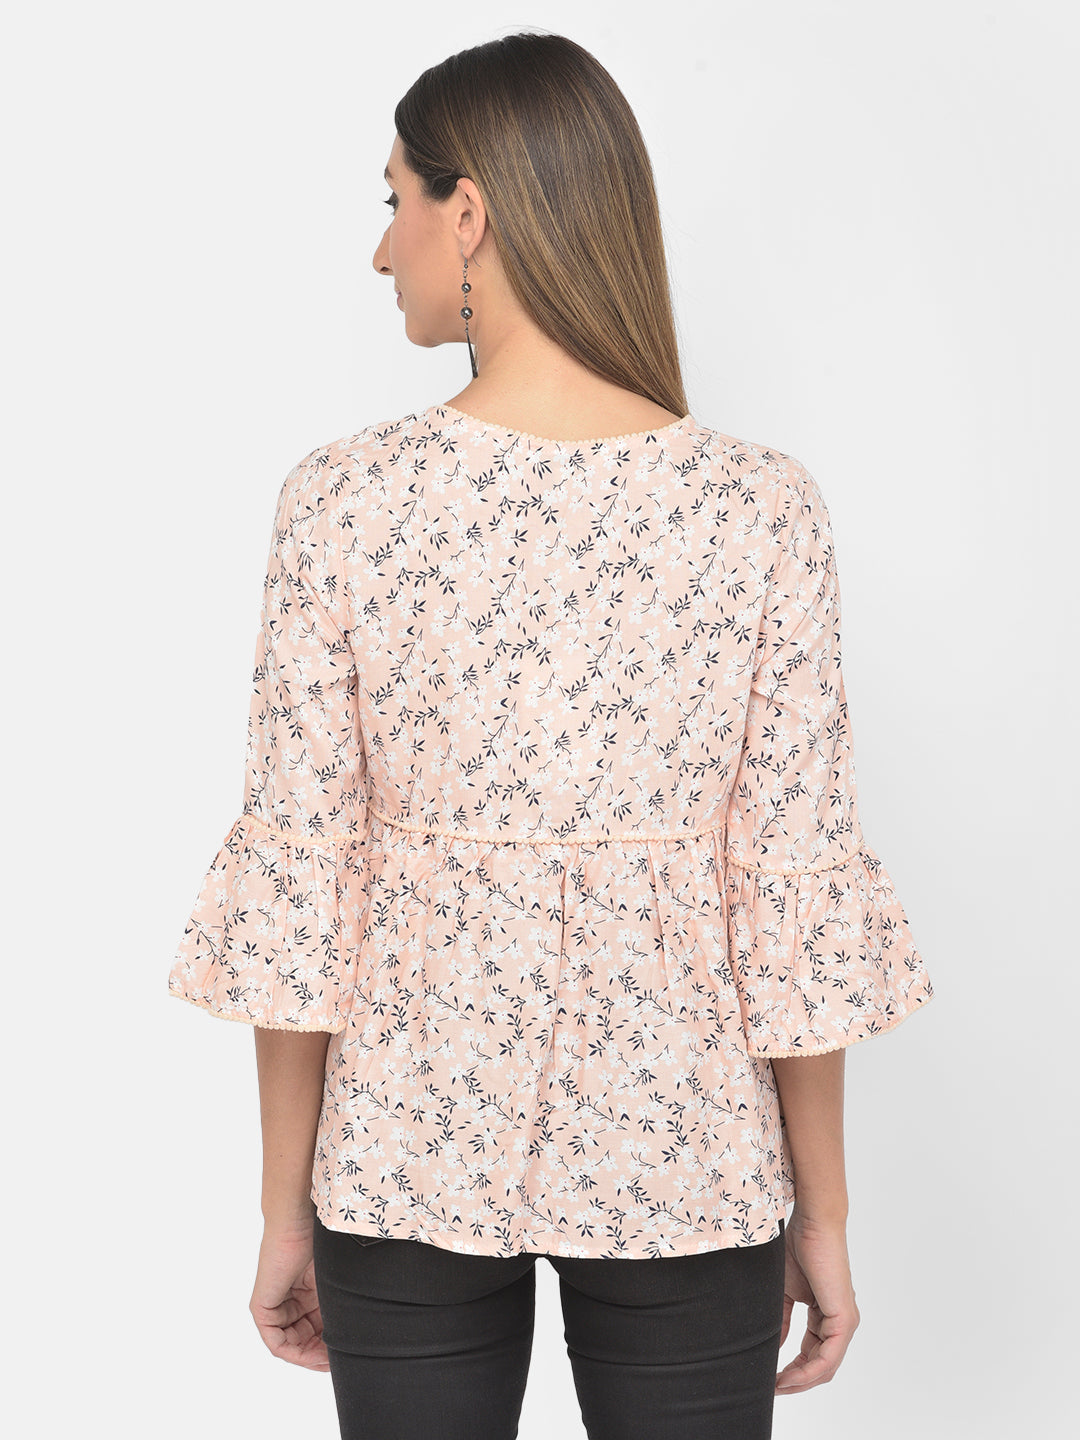 Peach 3/4 Sleeve With Printed Blouse